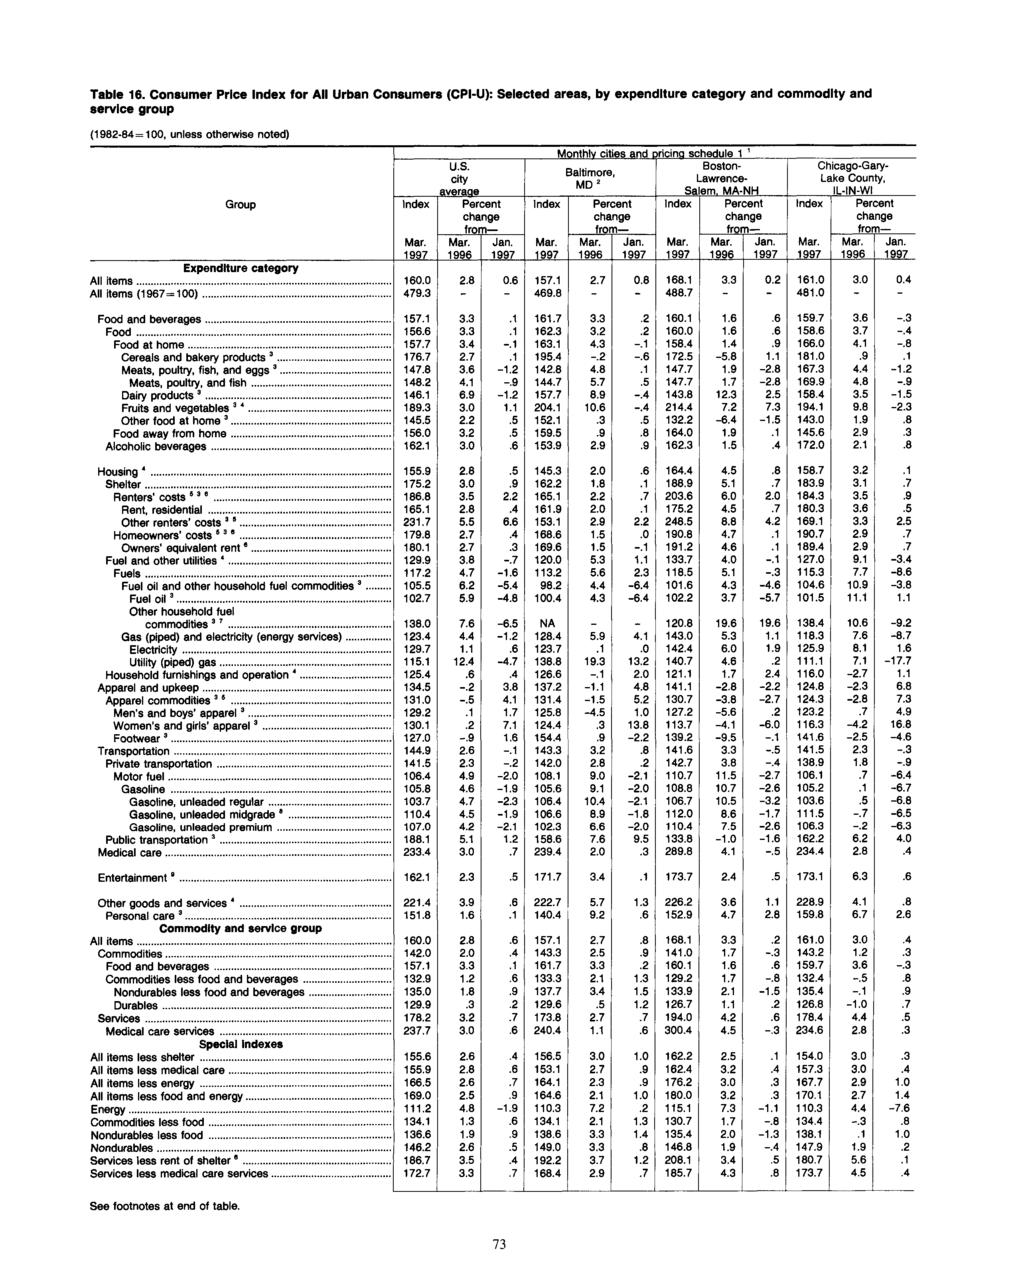 Table 16. Consumer Price for All Urban Consumers (CPI-U): Selected areas, by expenditure category and commodity and service group U.S. city average Group Jan.